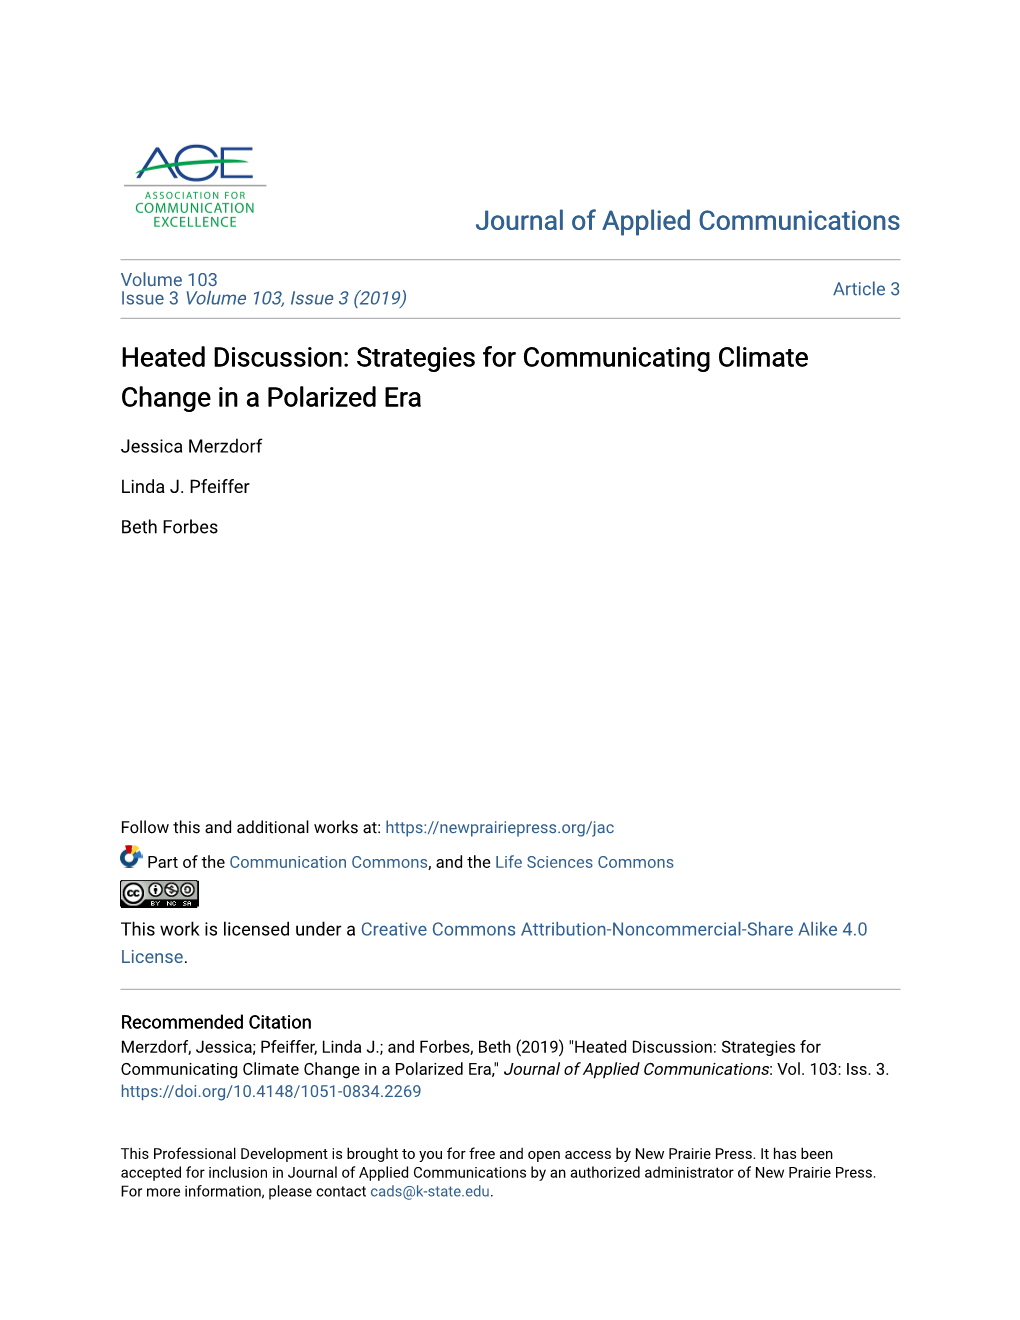 Heated Discussion: Strategies for Communicating Climate Change in a Polarized Era